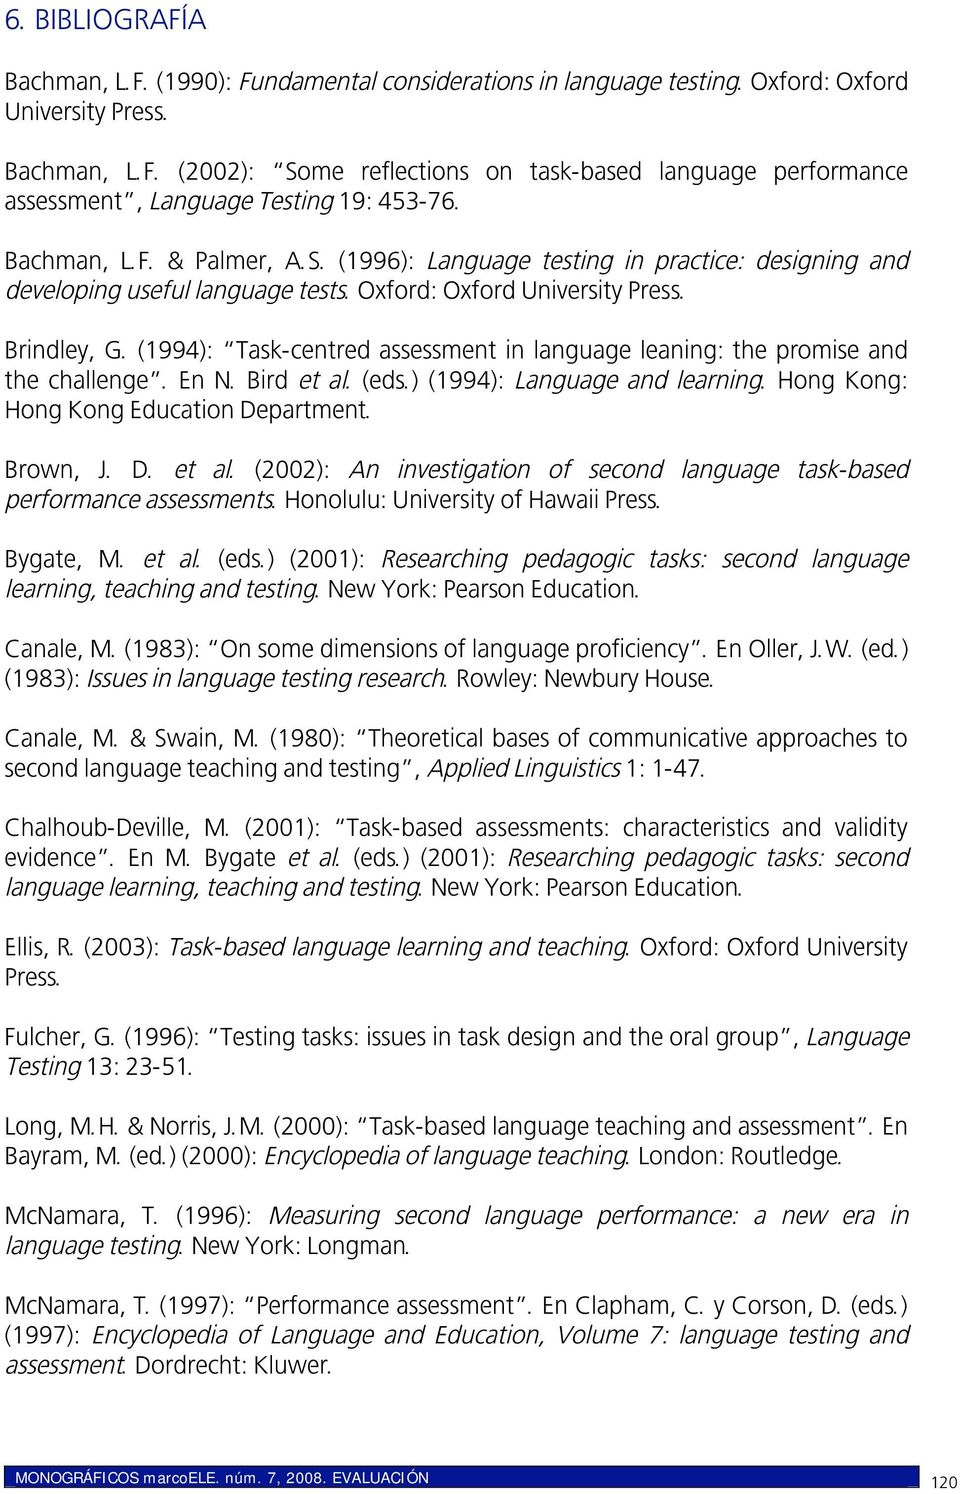 (1994): Task-centred assessment in language leaning: the promise and the challenge. En N. Bird et al. (eds.) (1994): Language and learning. Hong Kong: Hong Kong Education Department. Brown, J. D. et al. (2002): An investigation of second language task-based performance assessments.